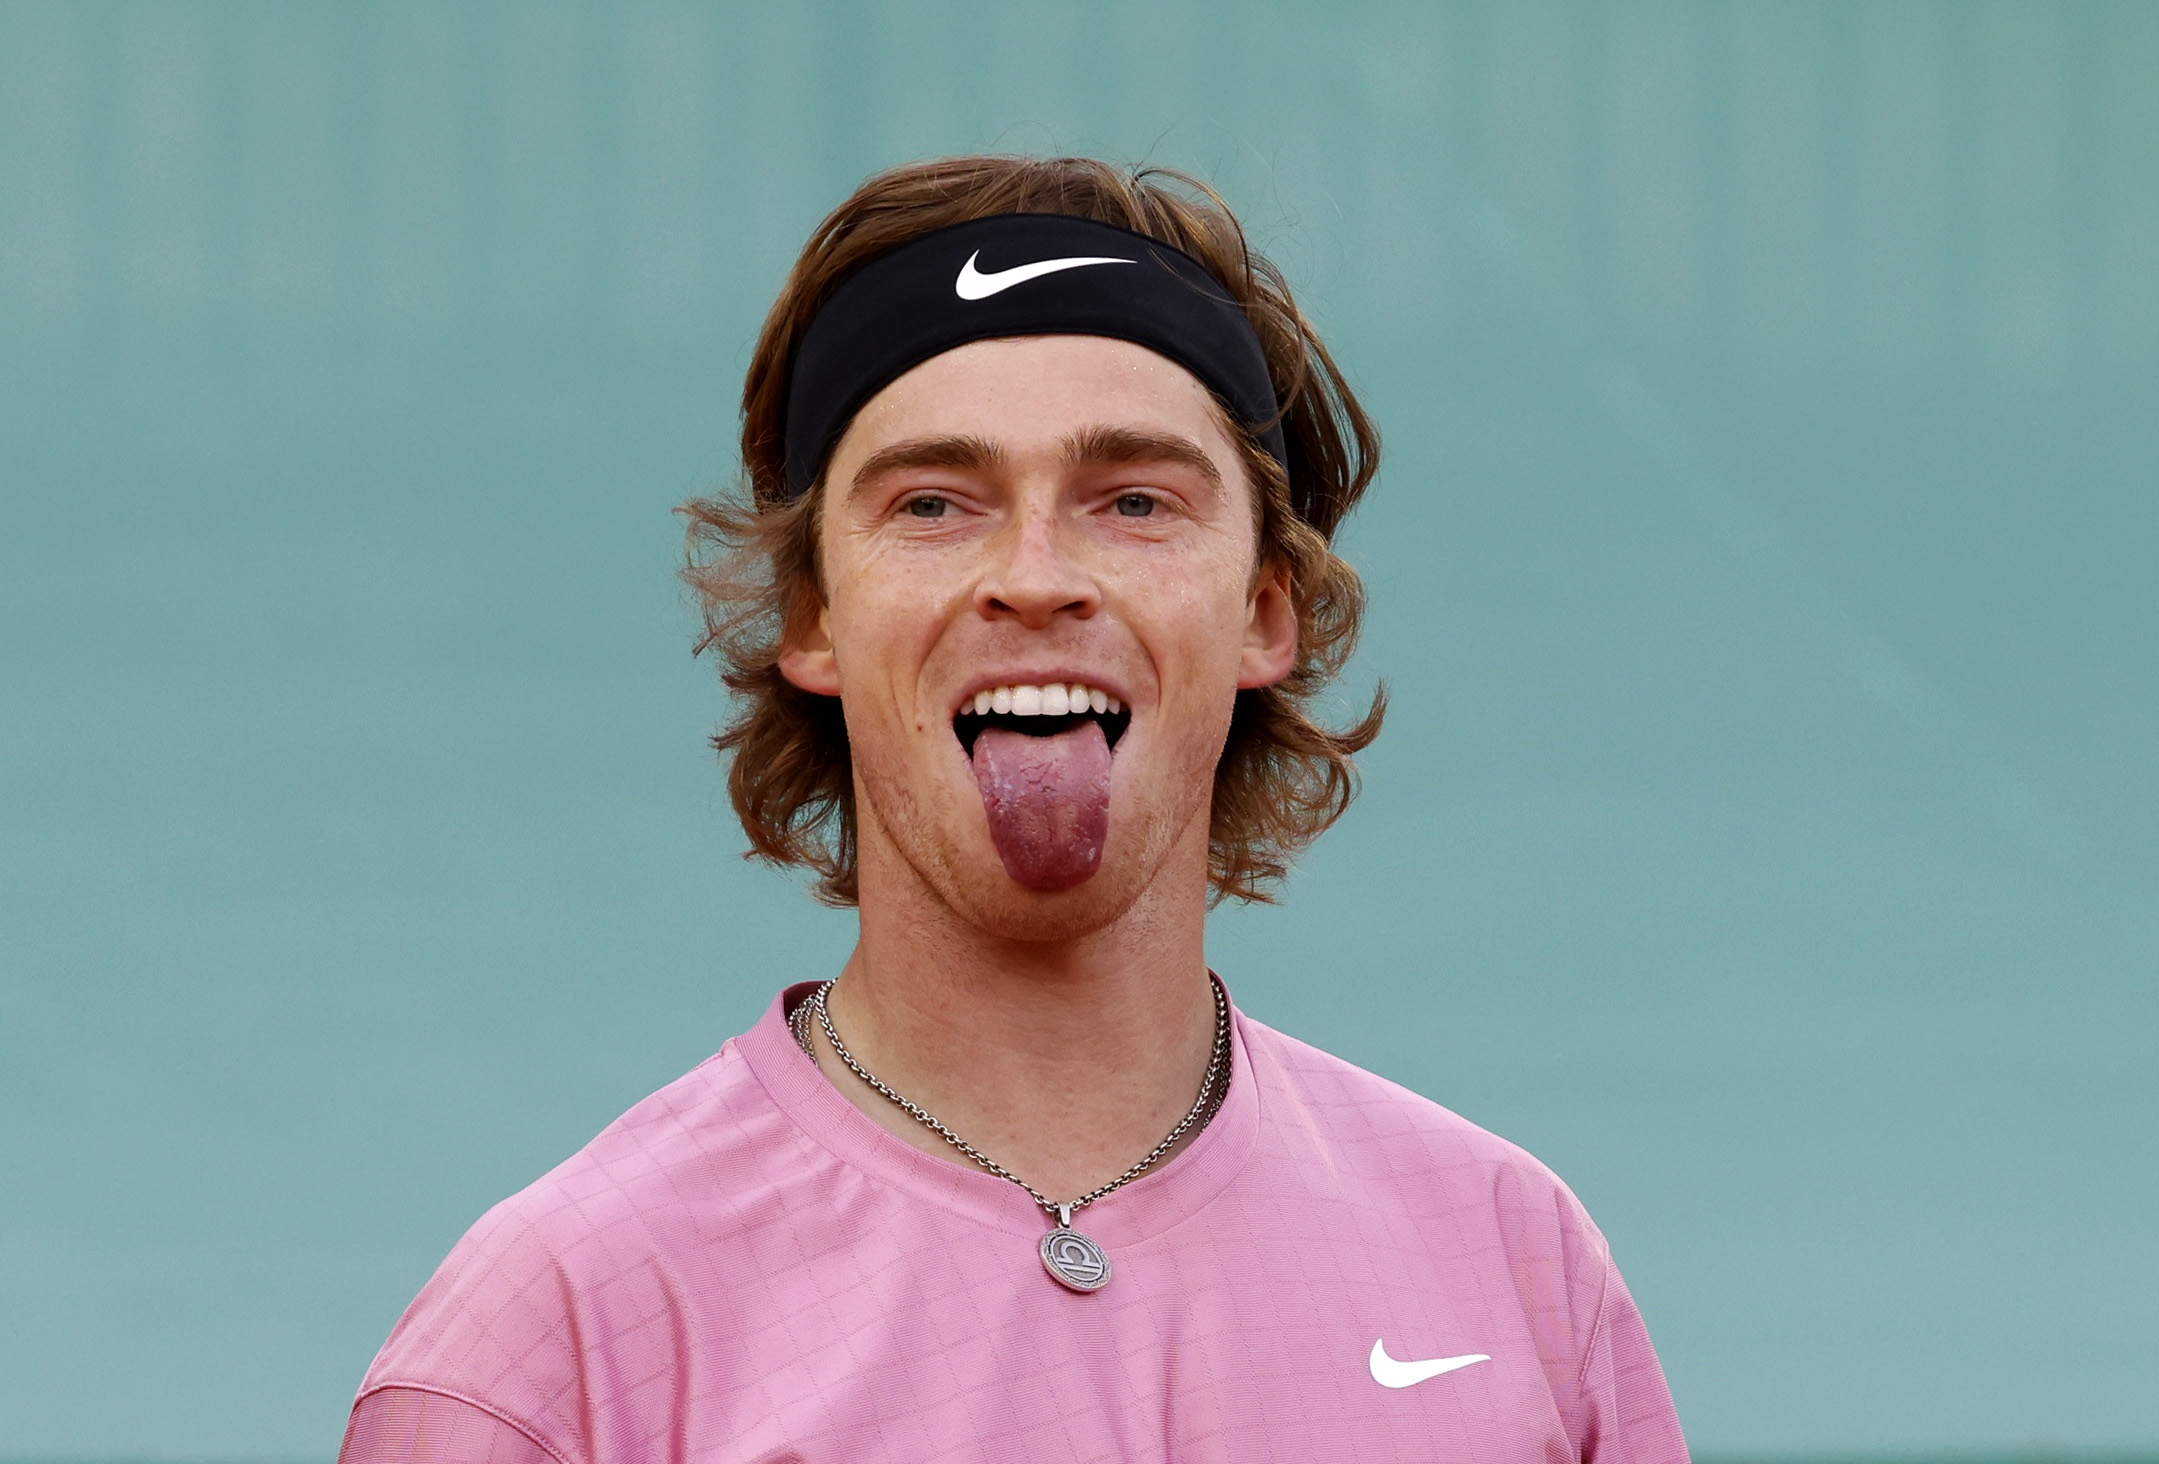 Russia's Andrey Rublev 